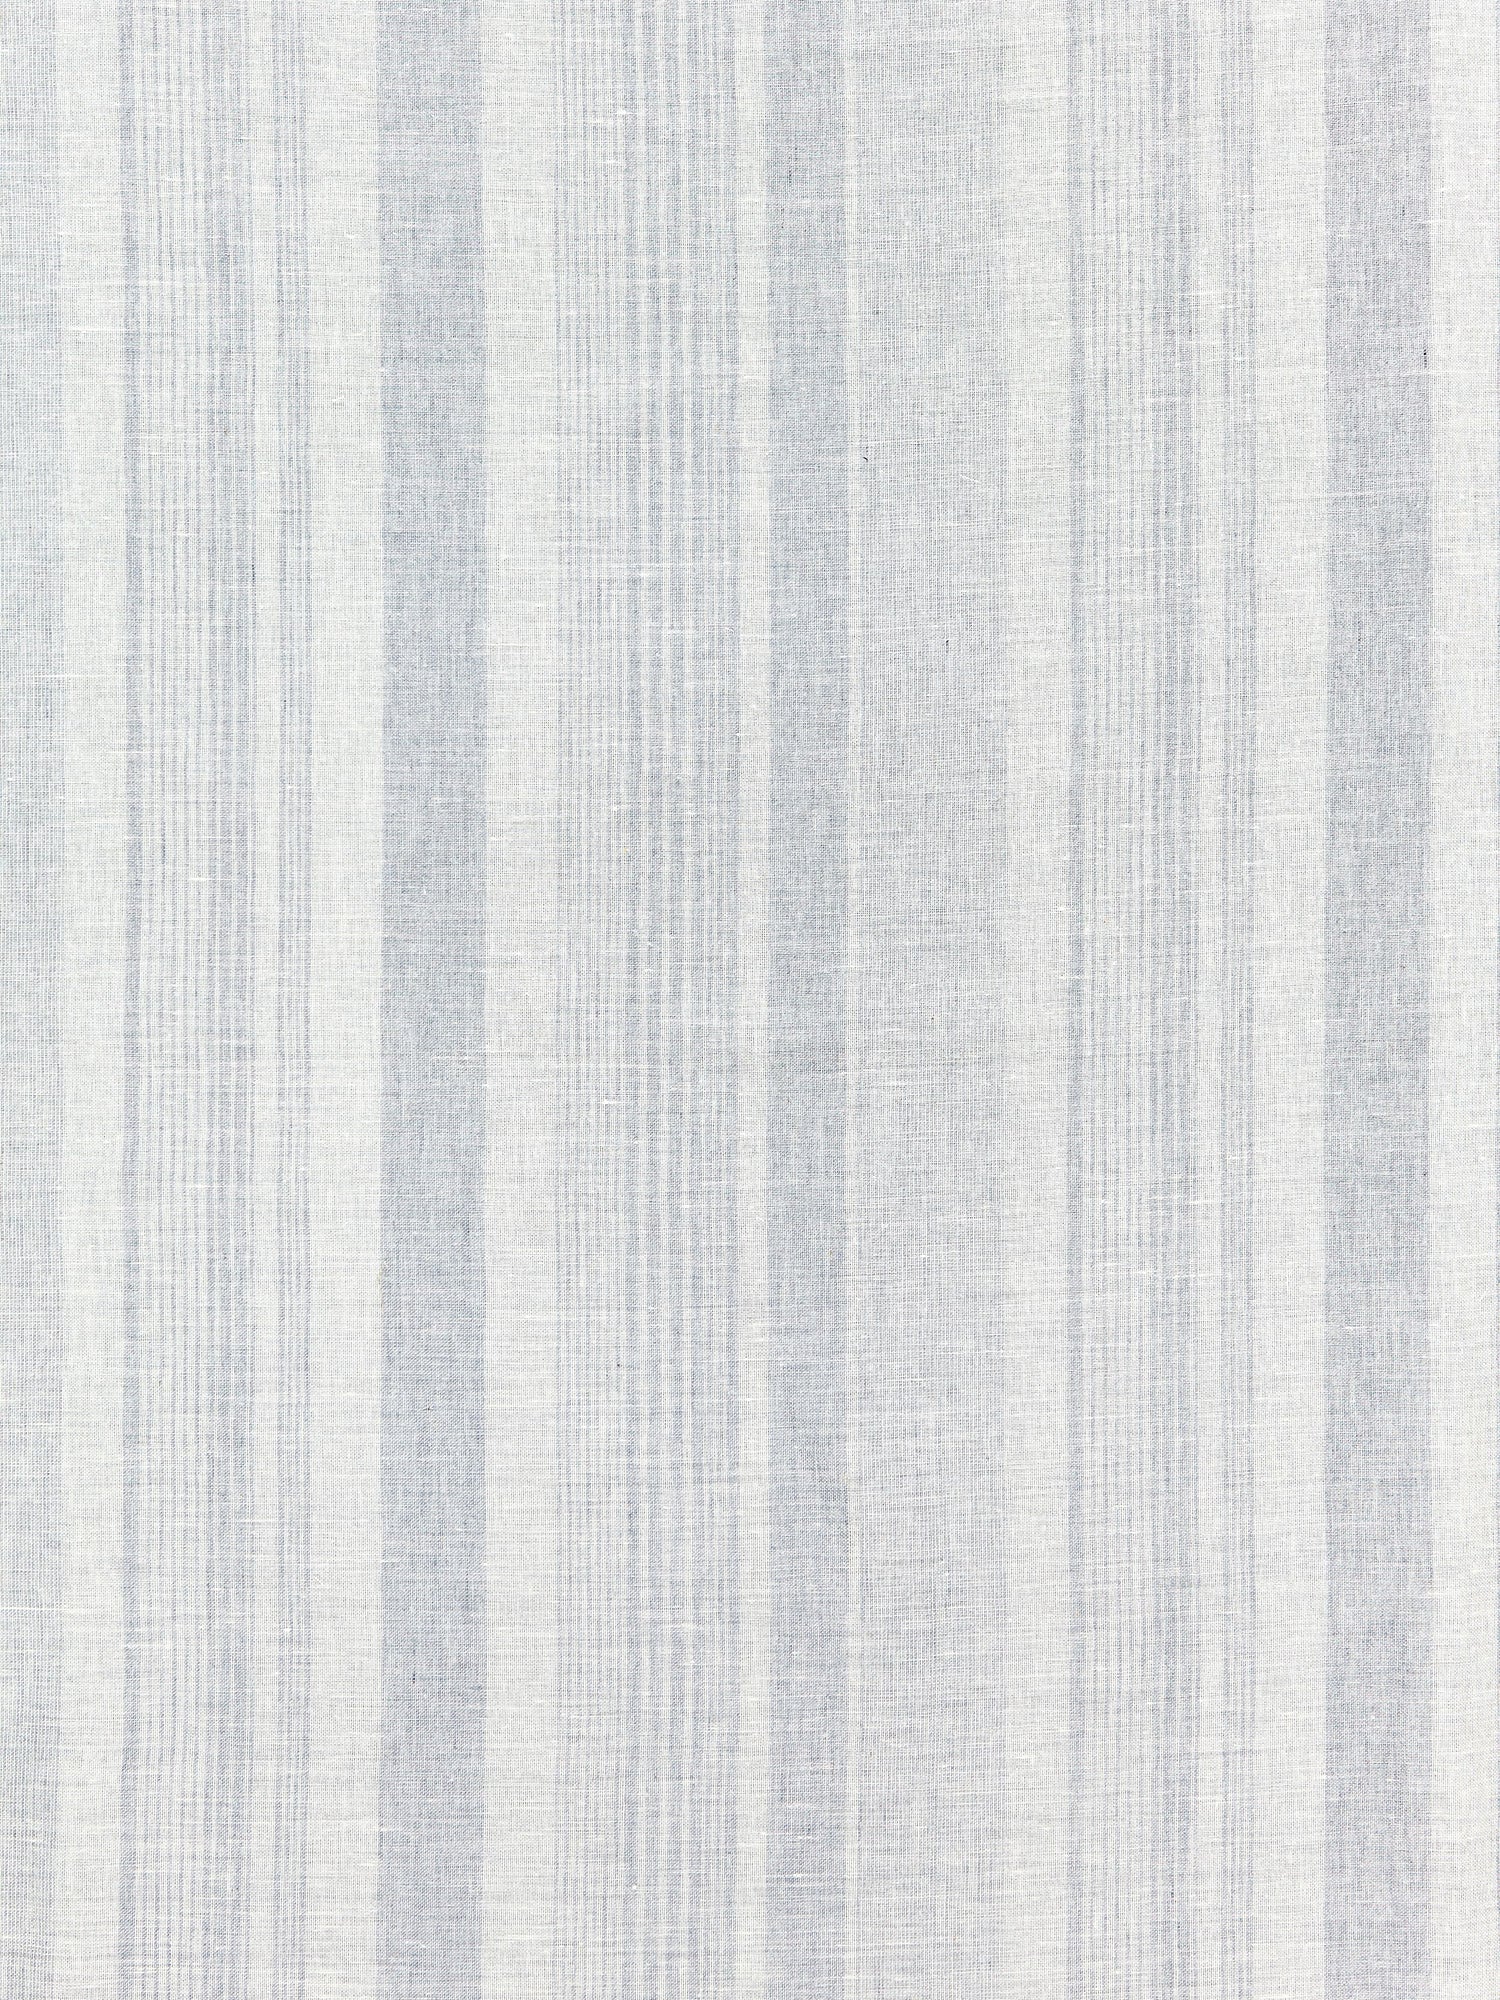 Montauk Stripe Sheer fabric in chambray color - pattern number SC 000327046 - by Scalamandre in the Scalamandre Fabrics Book 1 collection